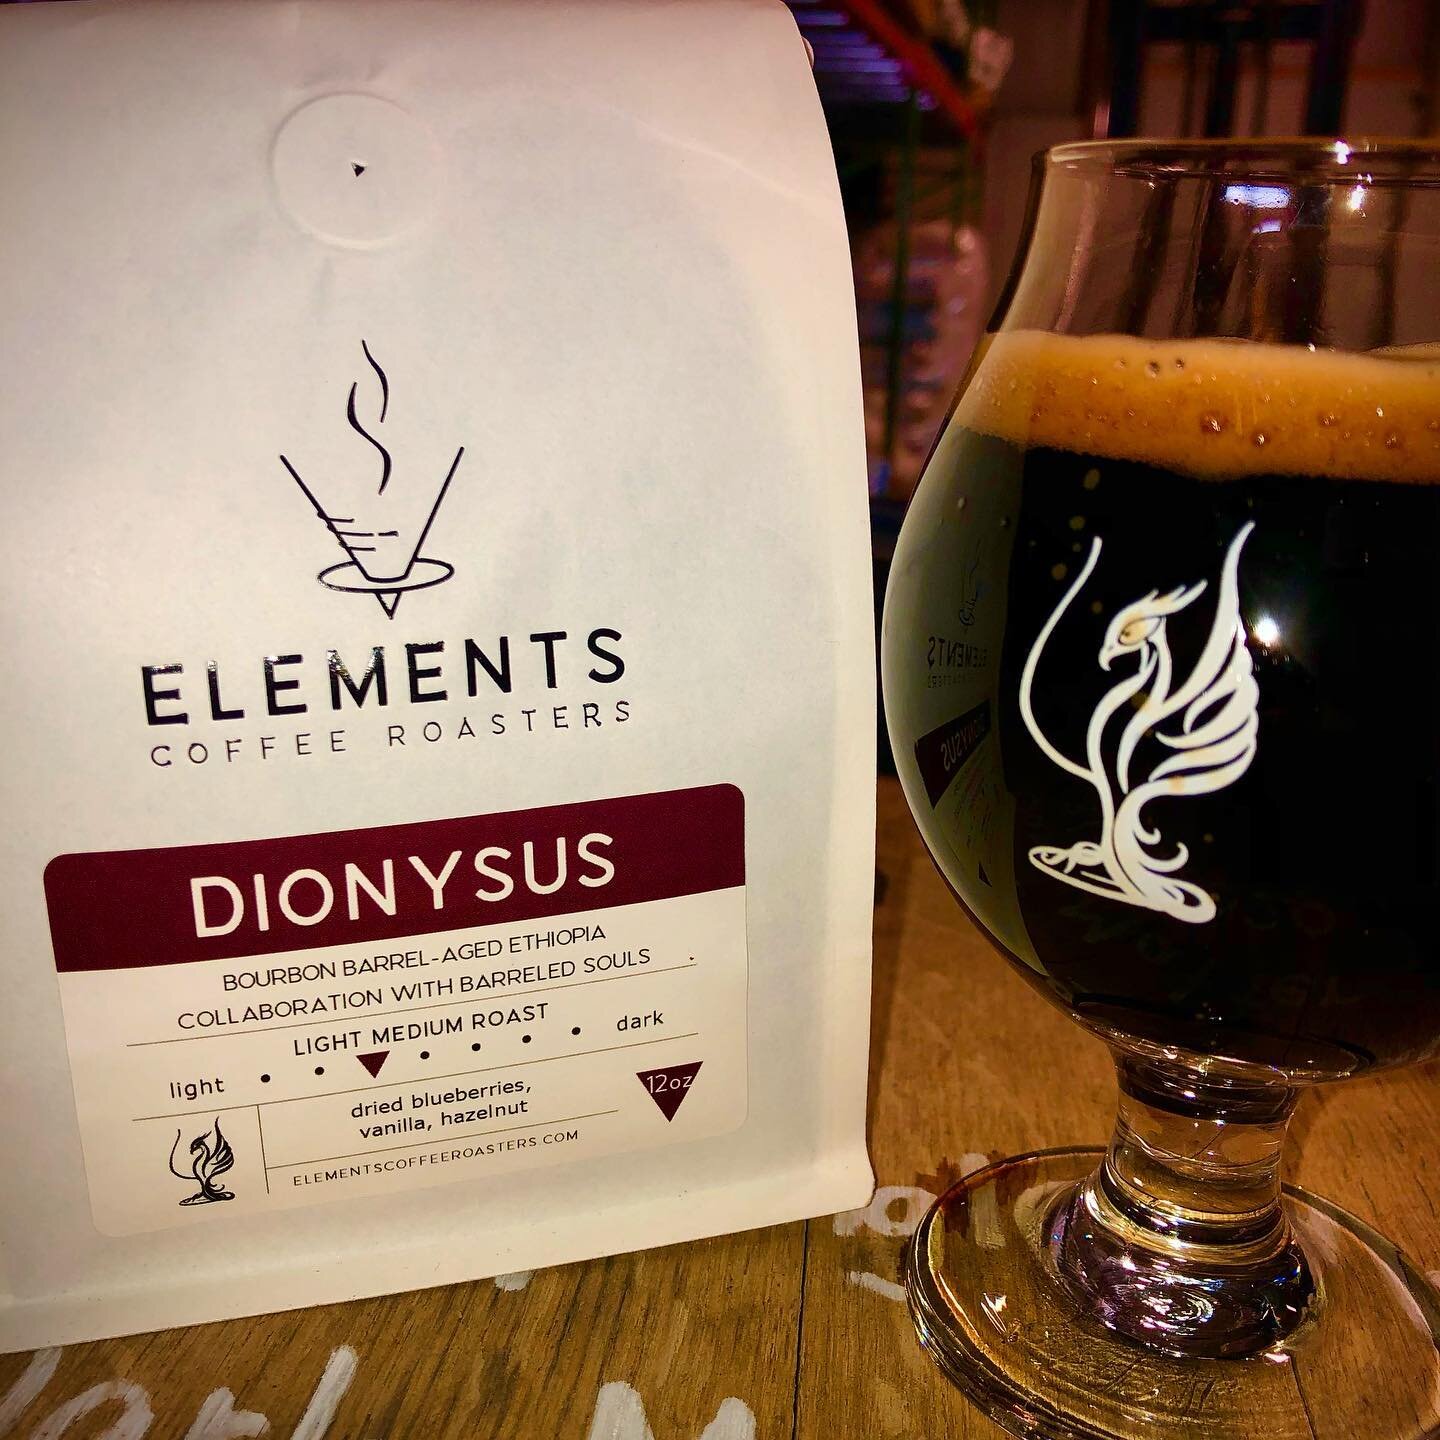 We have you covered for your drinking needs all day long. We just got a fresh batch of Dionysus, our barrel aged coffee made with @elementscoffeeroasters to go with a fridge full of beer. Open 11 to 4 today for to go and pick up. 

#barreledsoulsbrew